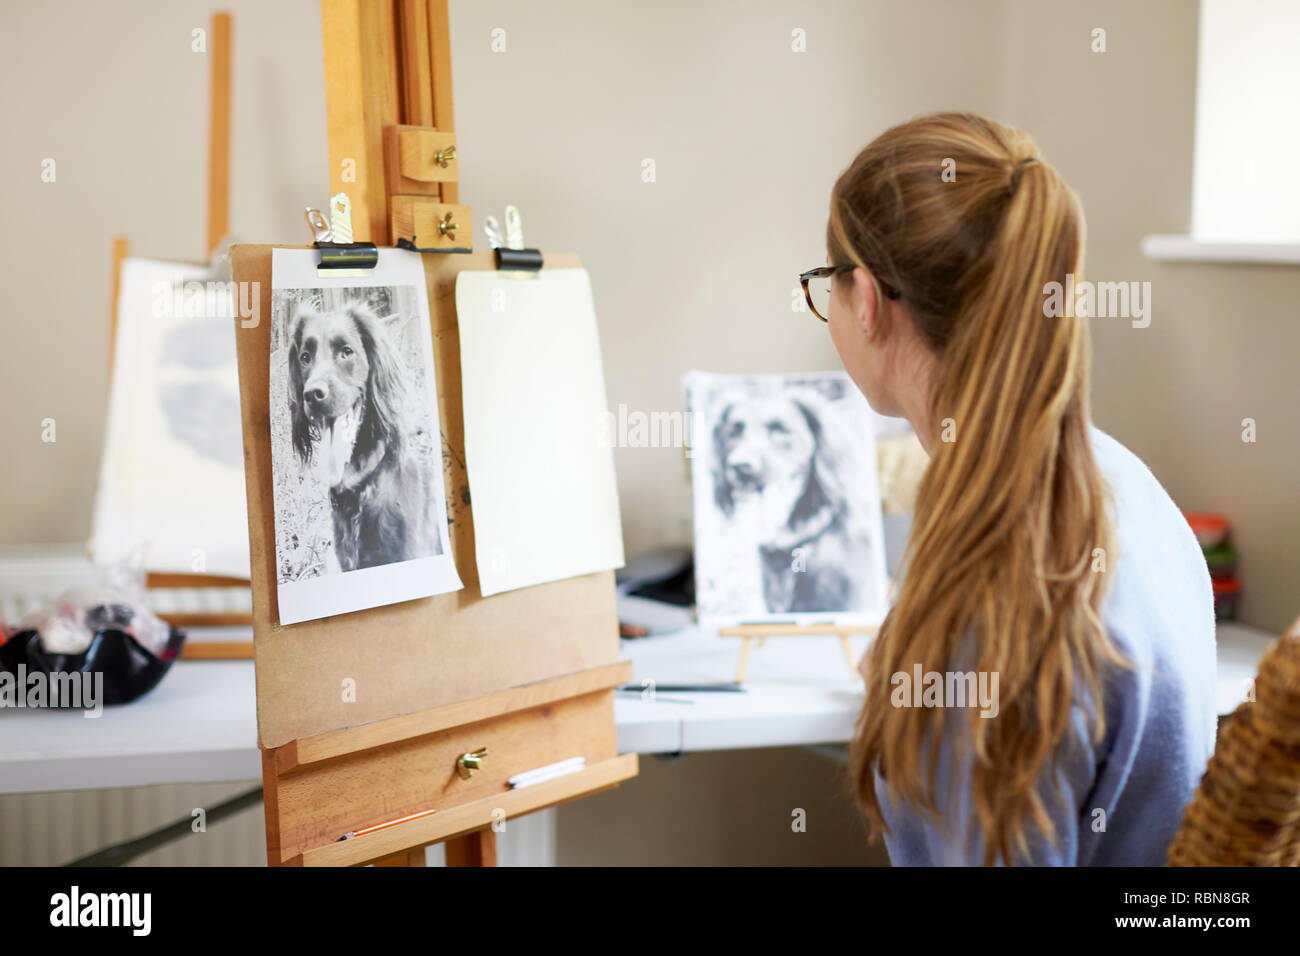 Female Teenage Artist Sitting At Easel Preparing To Draw Picture Of Dog From Photograph Stock Photo